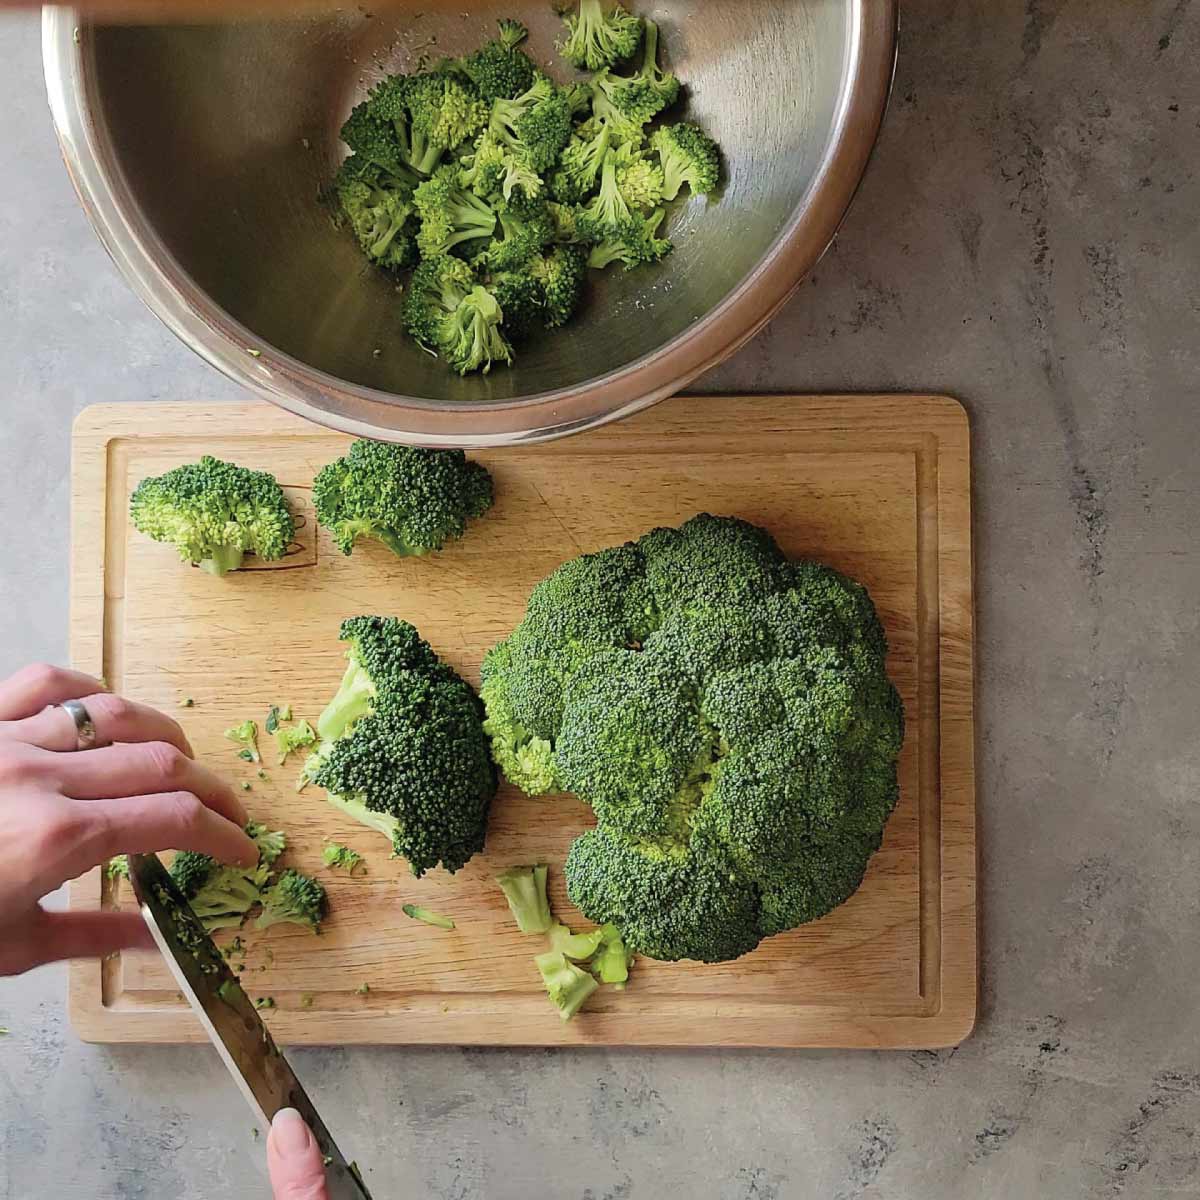 Broccoli being cut into small pieces on a cutting board.